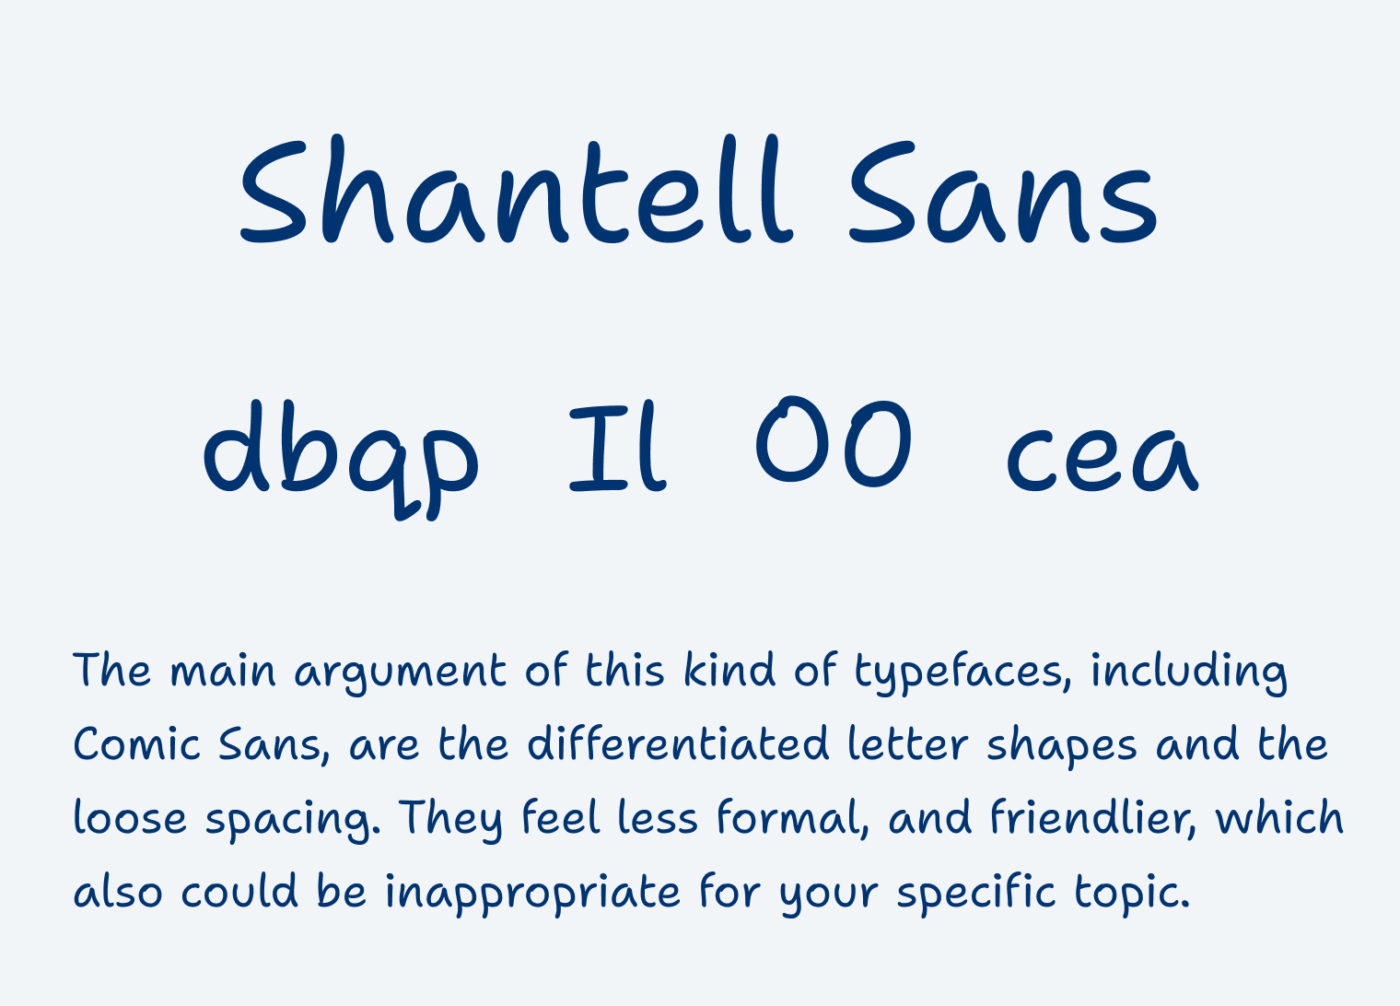 Shantell Sans The main argument of these kinds of typefaces, including Comic Sans, are the differentiated letter shapes and the loose spacing. They feel less formal, and friendlier, which also could be inappropriate for your specific topic.